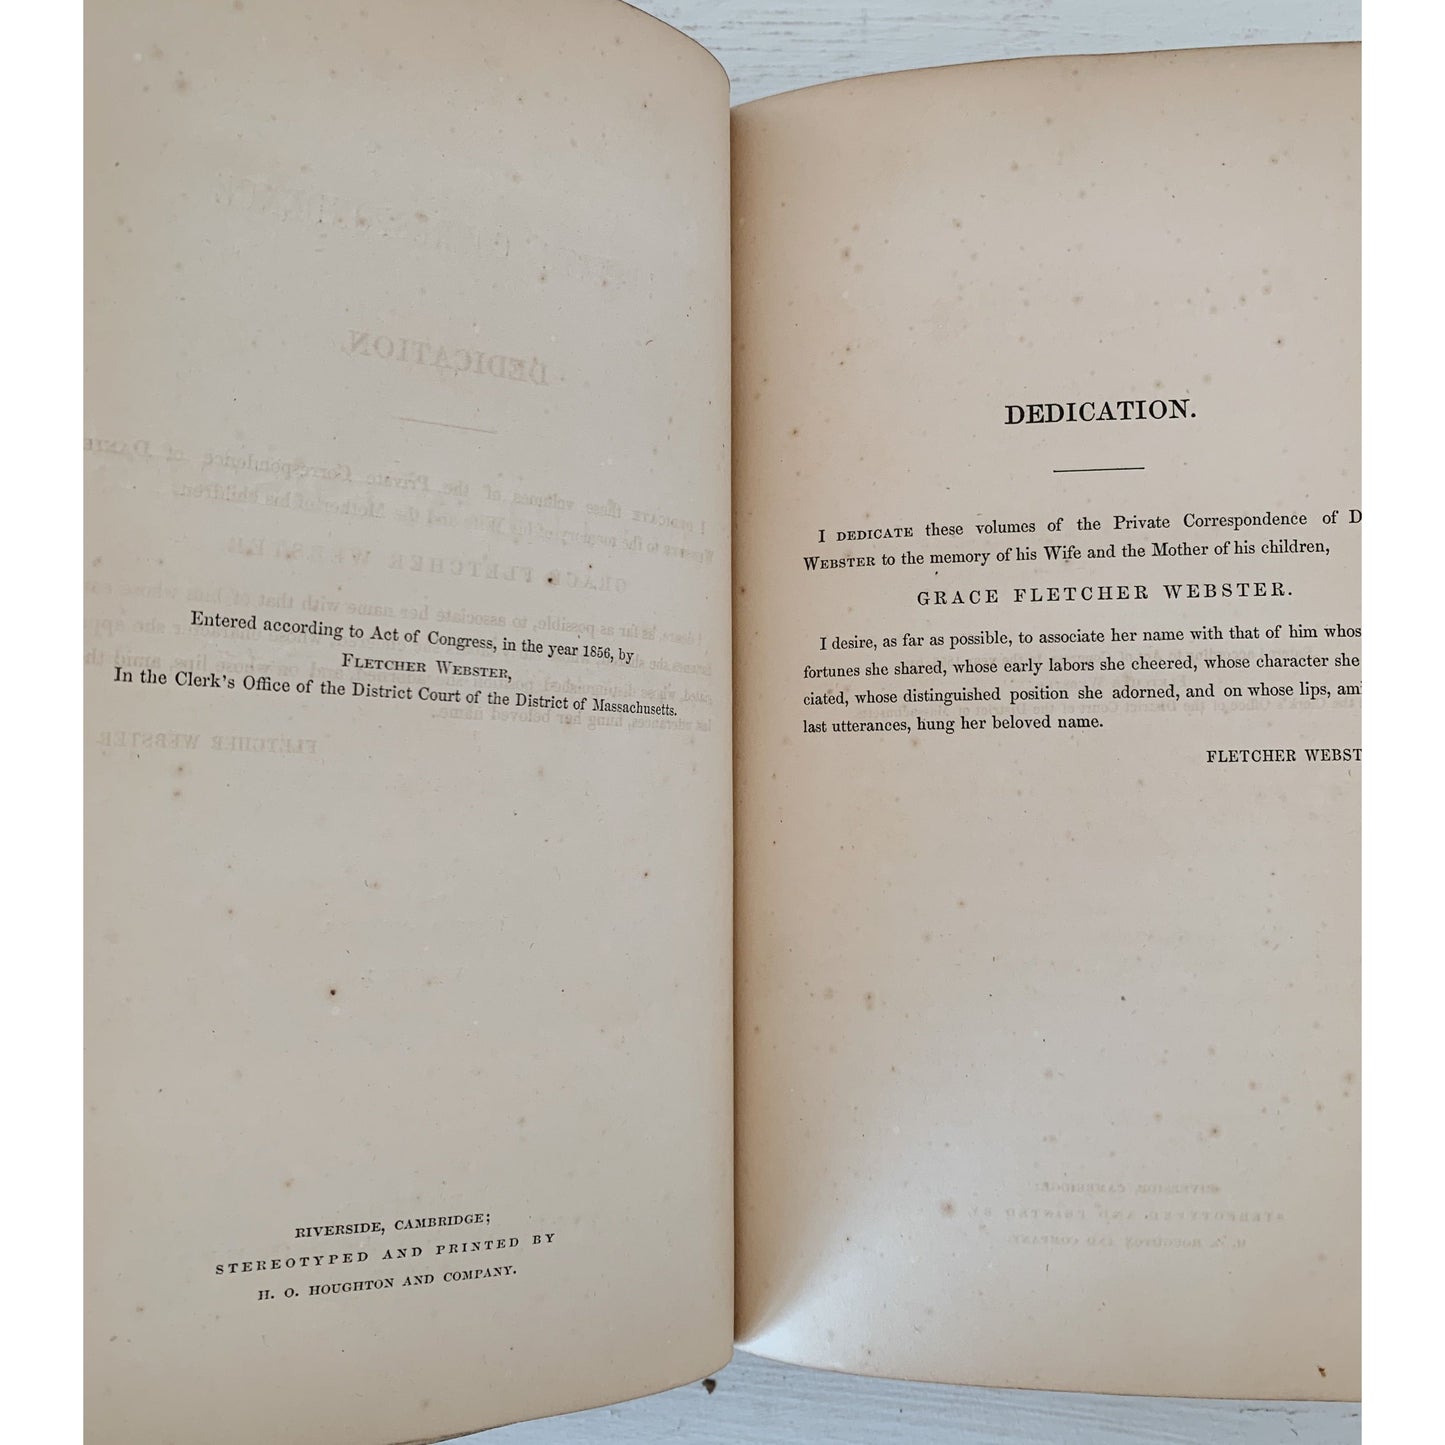 The Private Correspondence of Daniel Webster in Two Volumes, 1857, leather, Edited by Fletcher Webster